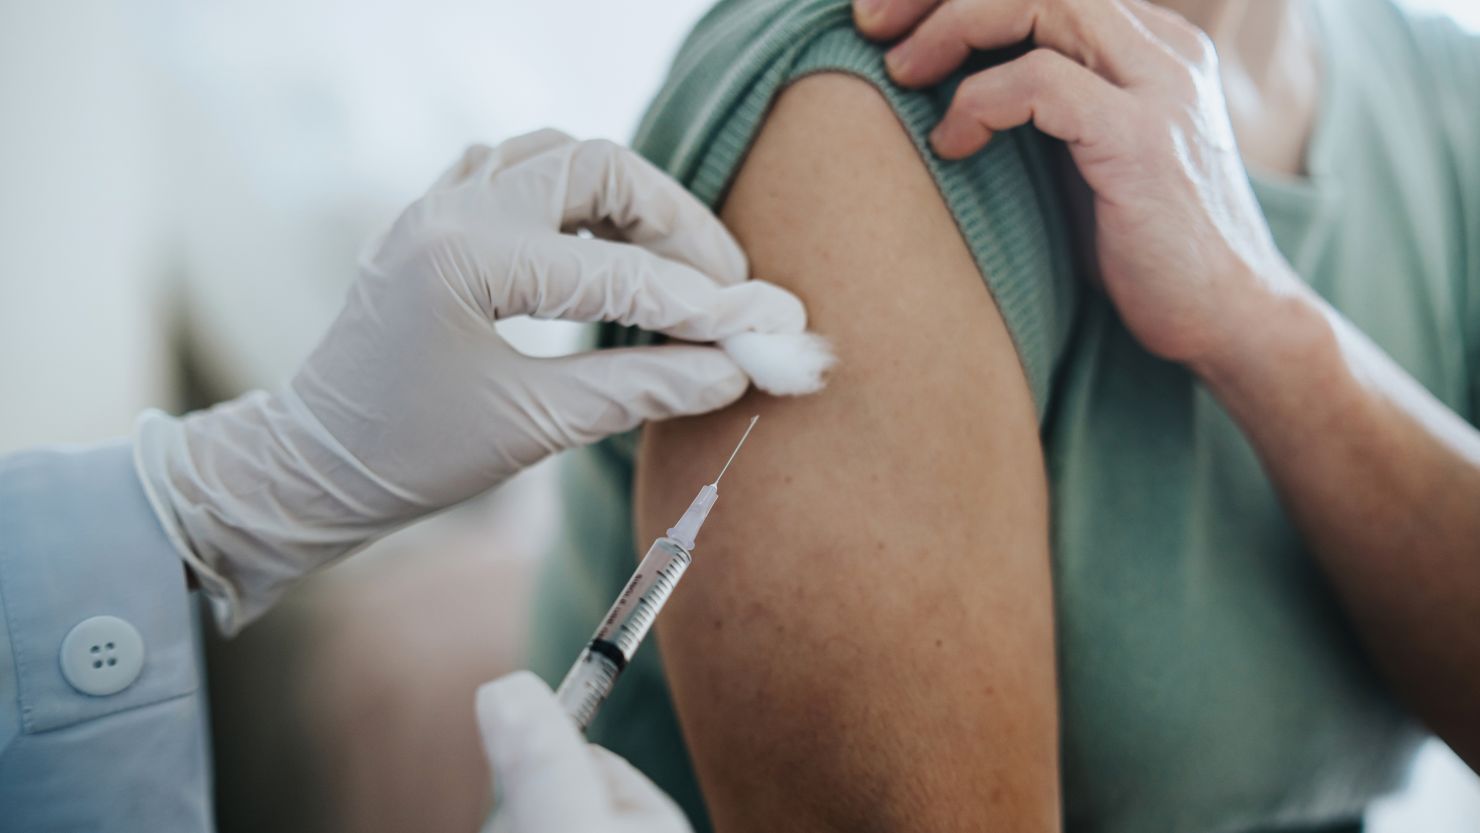 Close up of senior Asian woman getting Covid-19 vaccine in arm for Coronavirus immunization by a doctor at hospital. Elderly healthcare and illness prevention concept